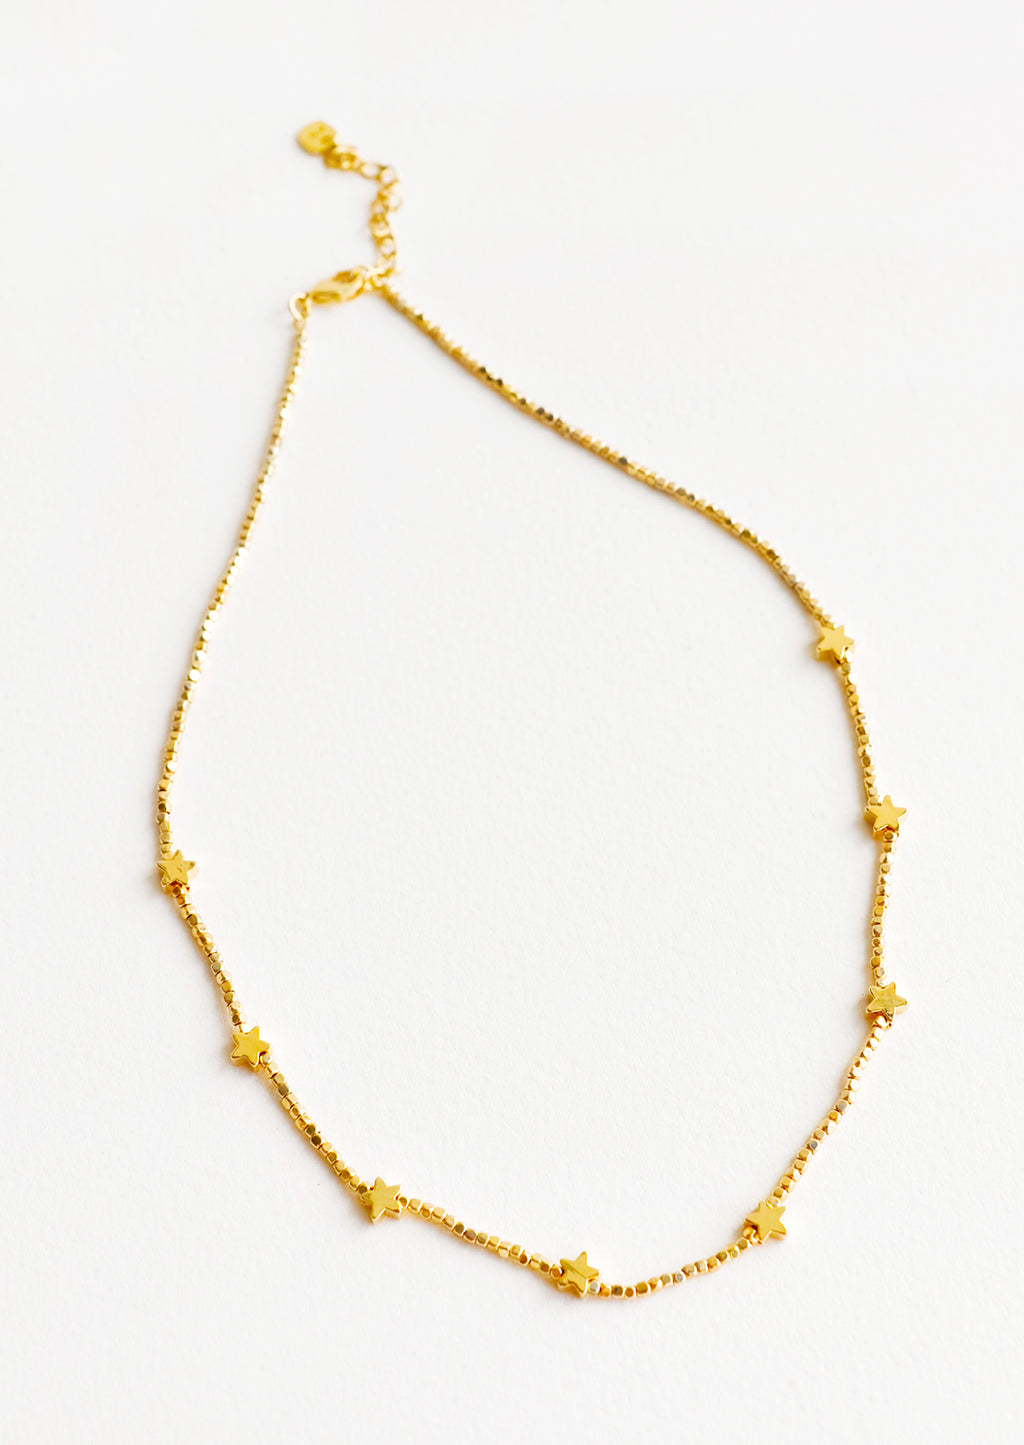 1: Short necklace featuring round yellow gold beads interspersed with gold star beads and an adjustable closure.